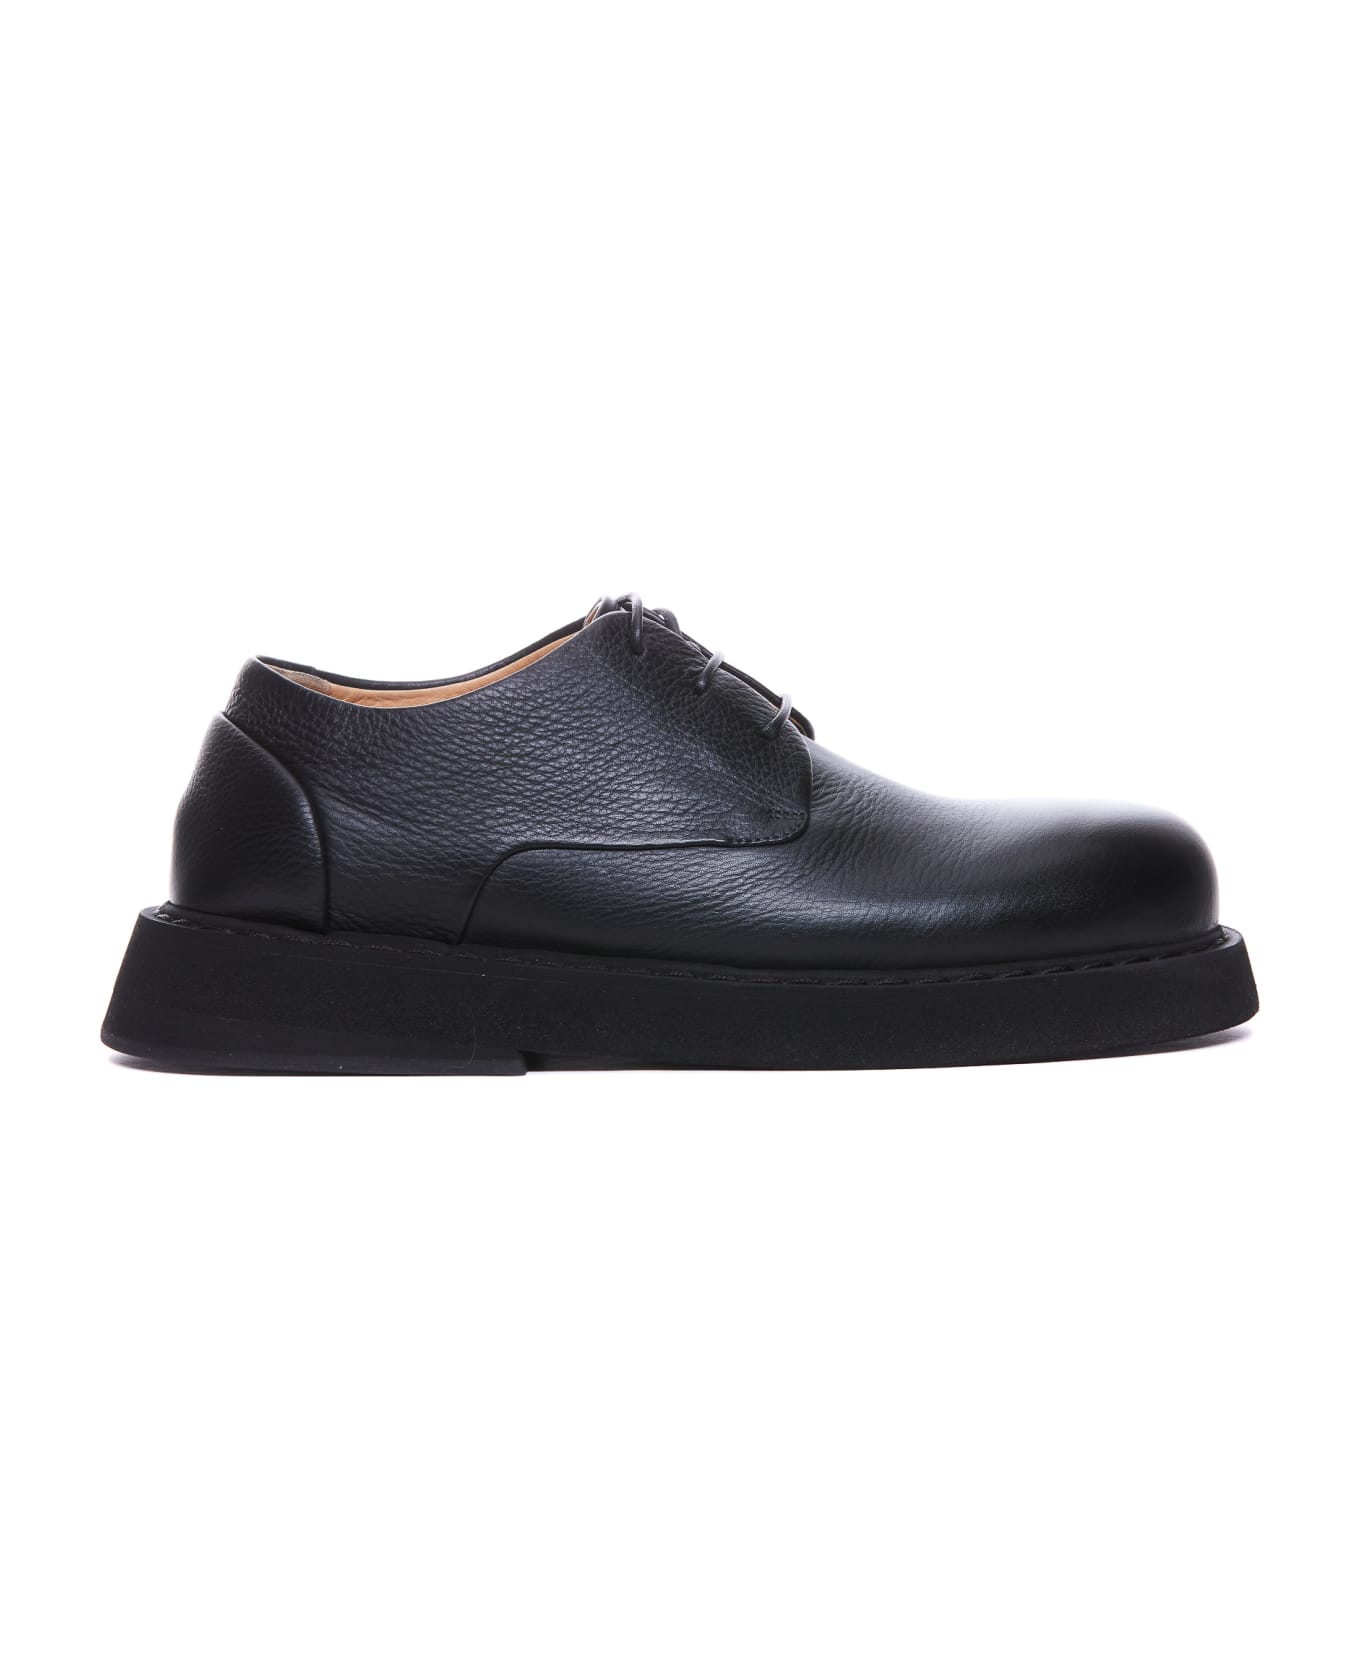 Marsell Spalla Derby Laced Up Shoes - Black ローファー＆デッキシューズ